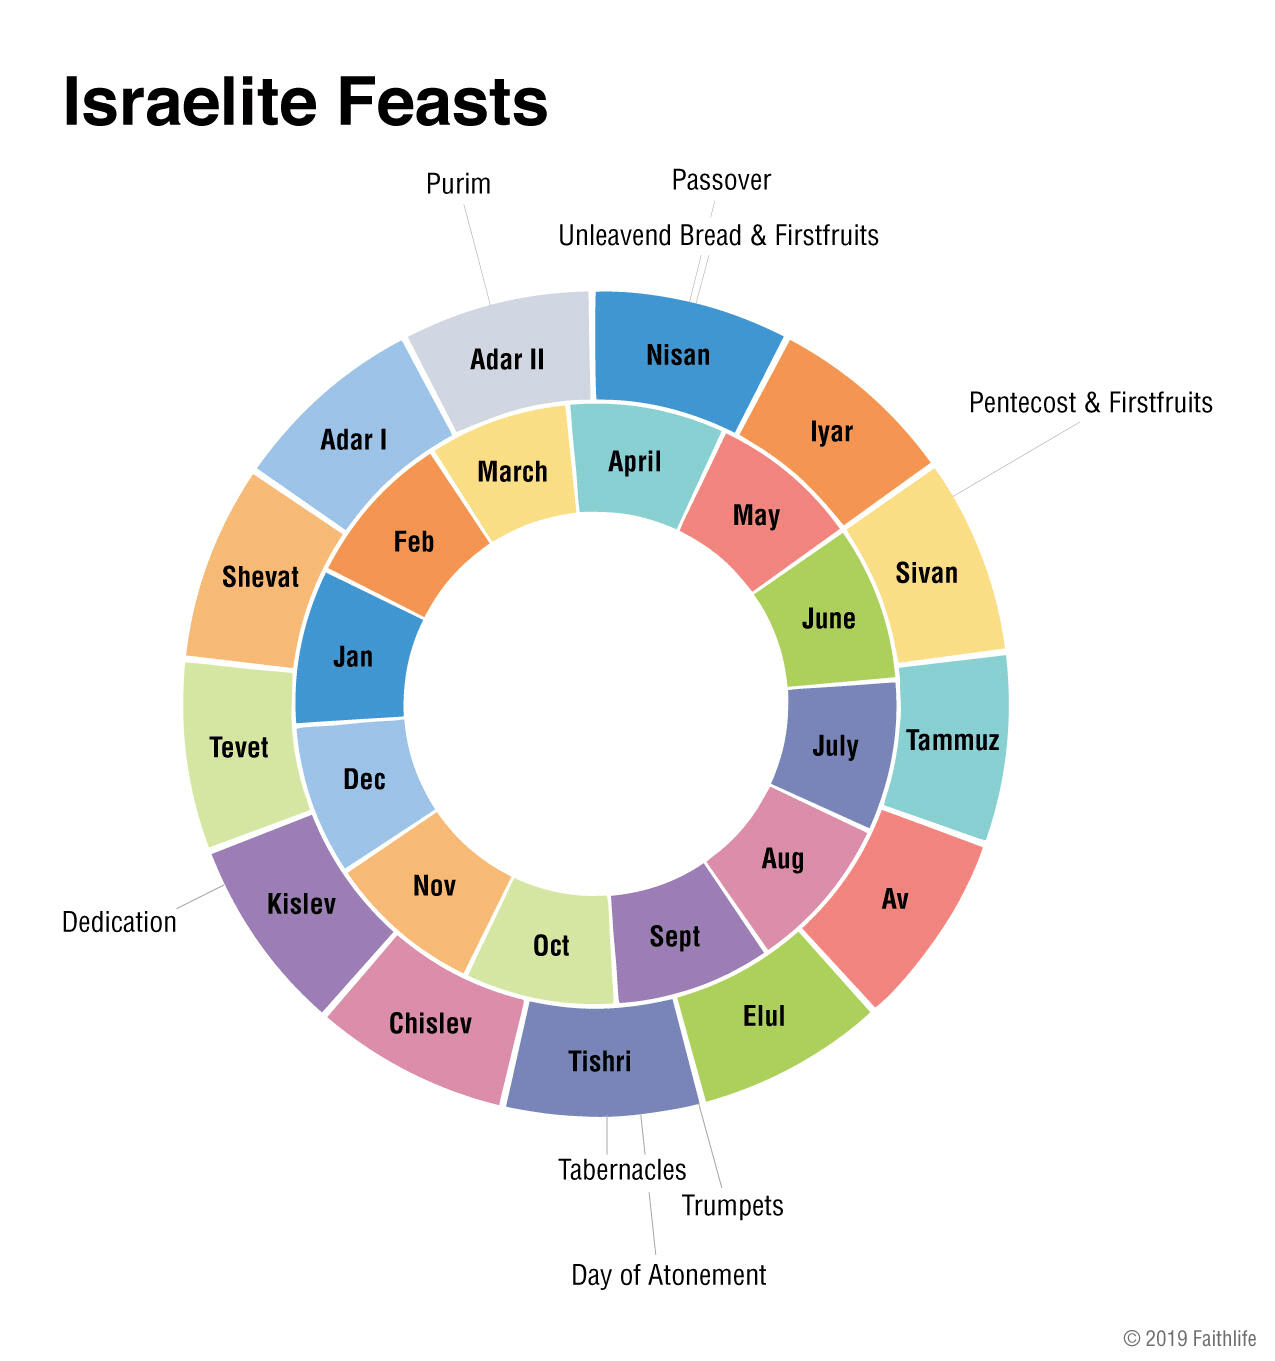 colorful chart displays Israelite feasts in the Bible, including Pentecost & Firstfruits